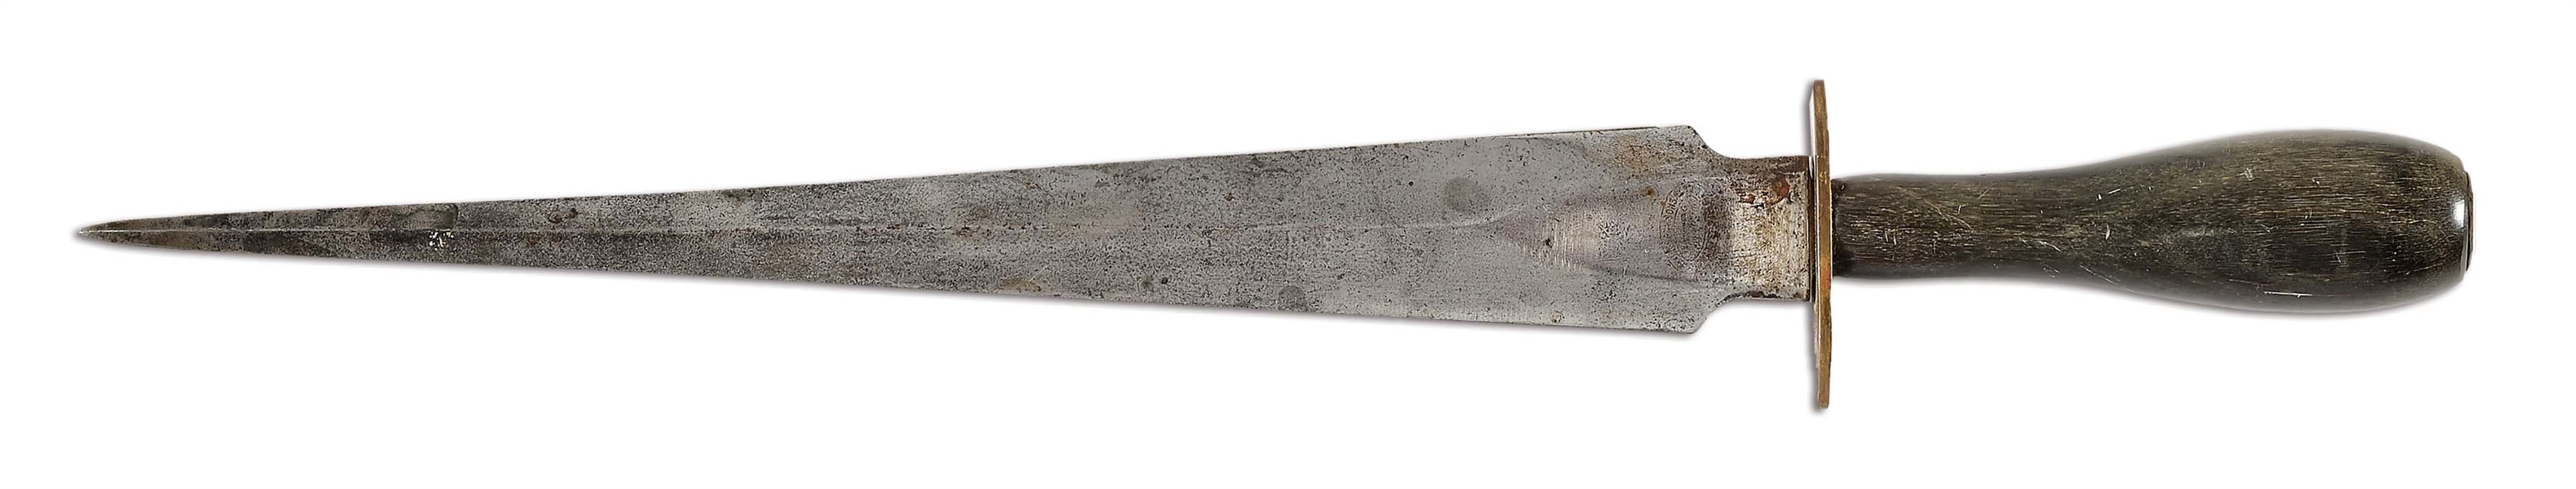 CONTEMPORARY DAGGER BY WILLIAM GREGORY SONS OF SHEFFIELD.